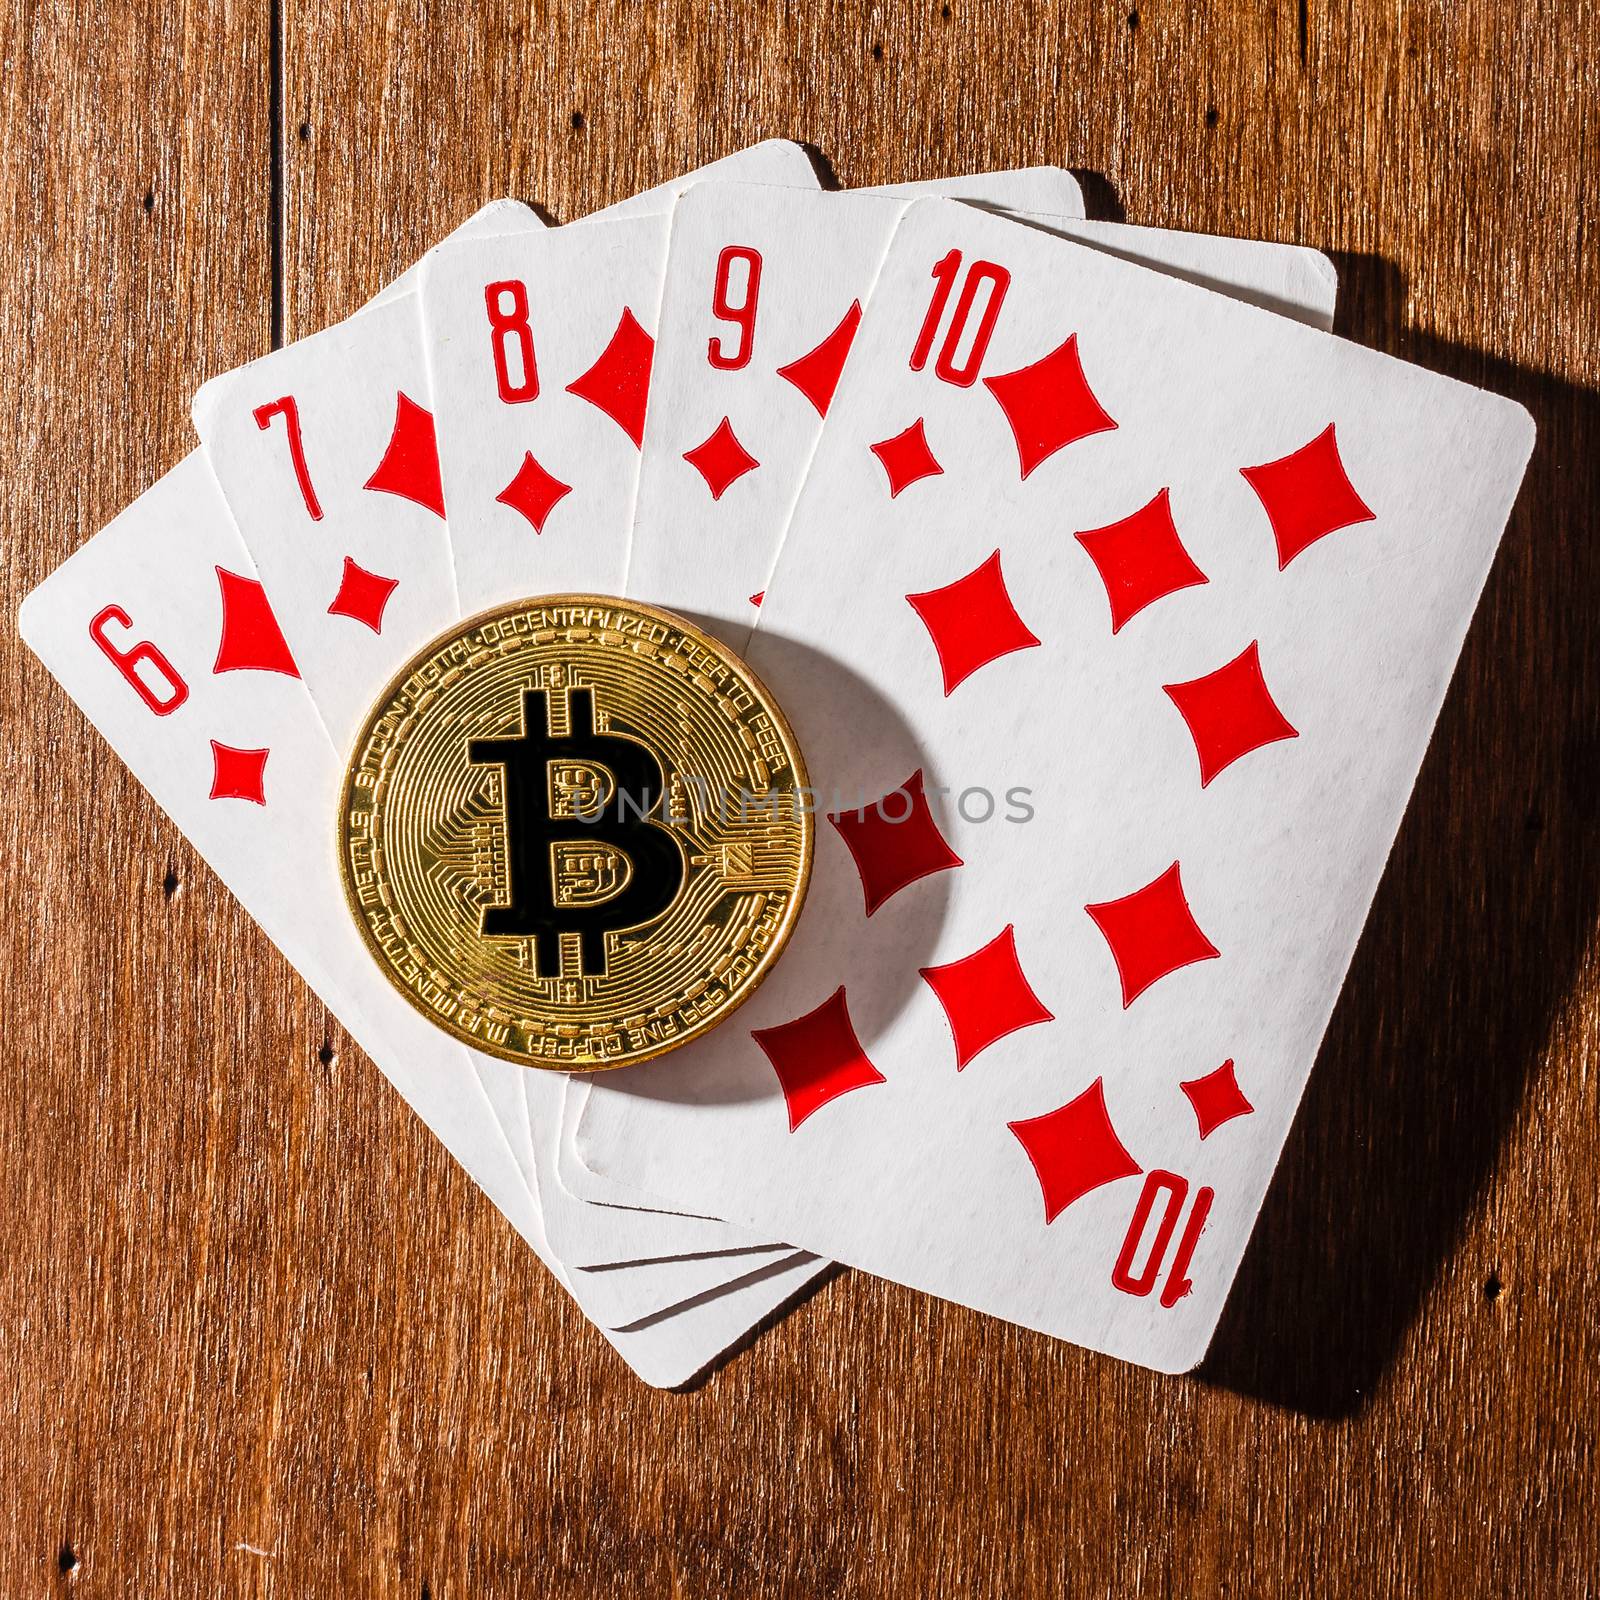 Bitcoin coin, cards and dices on table